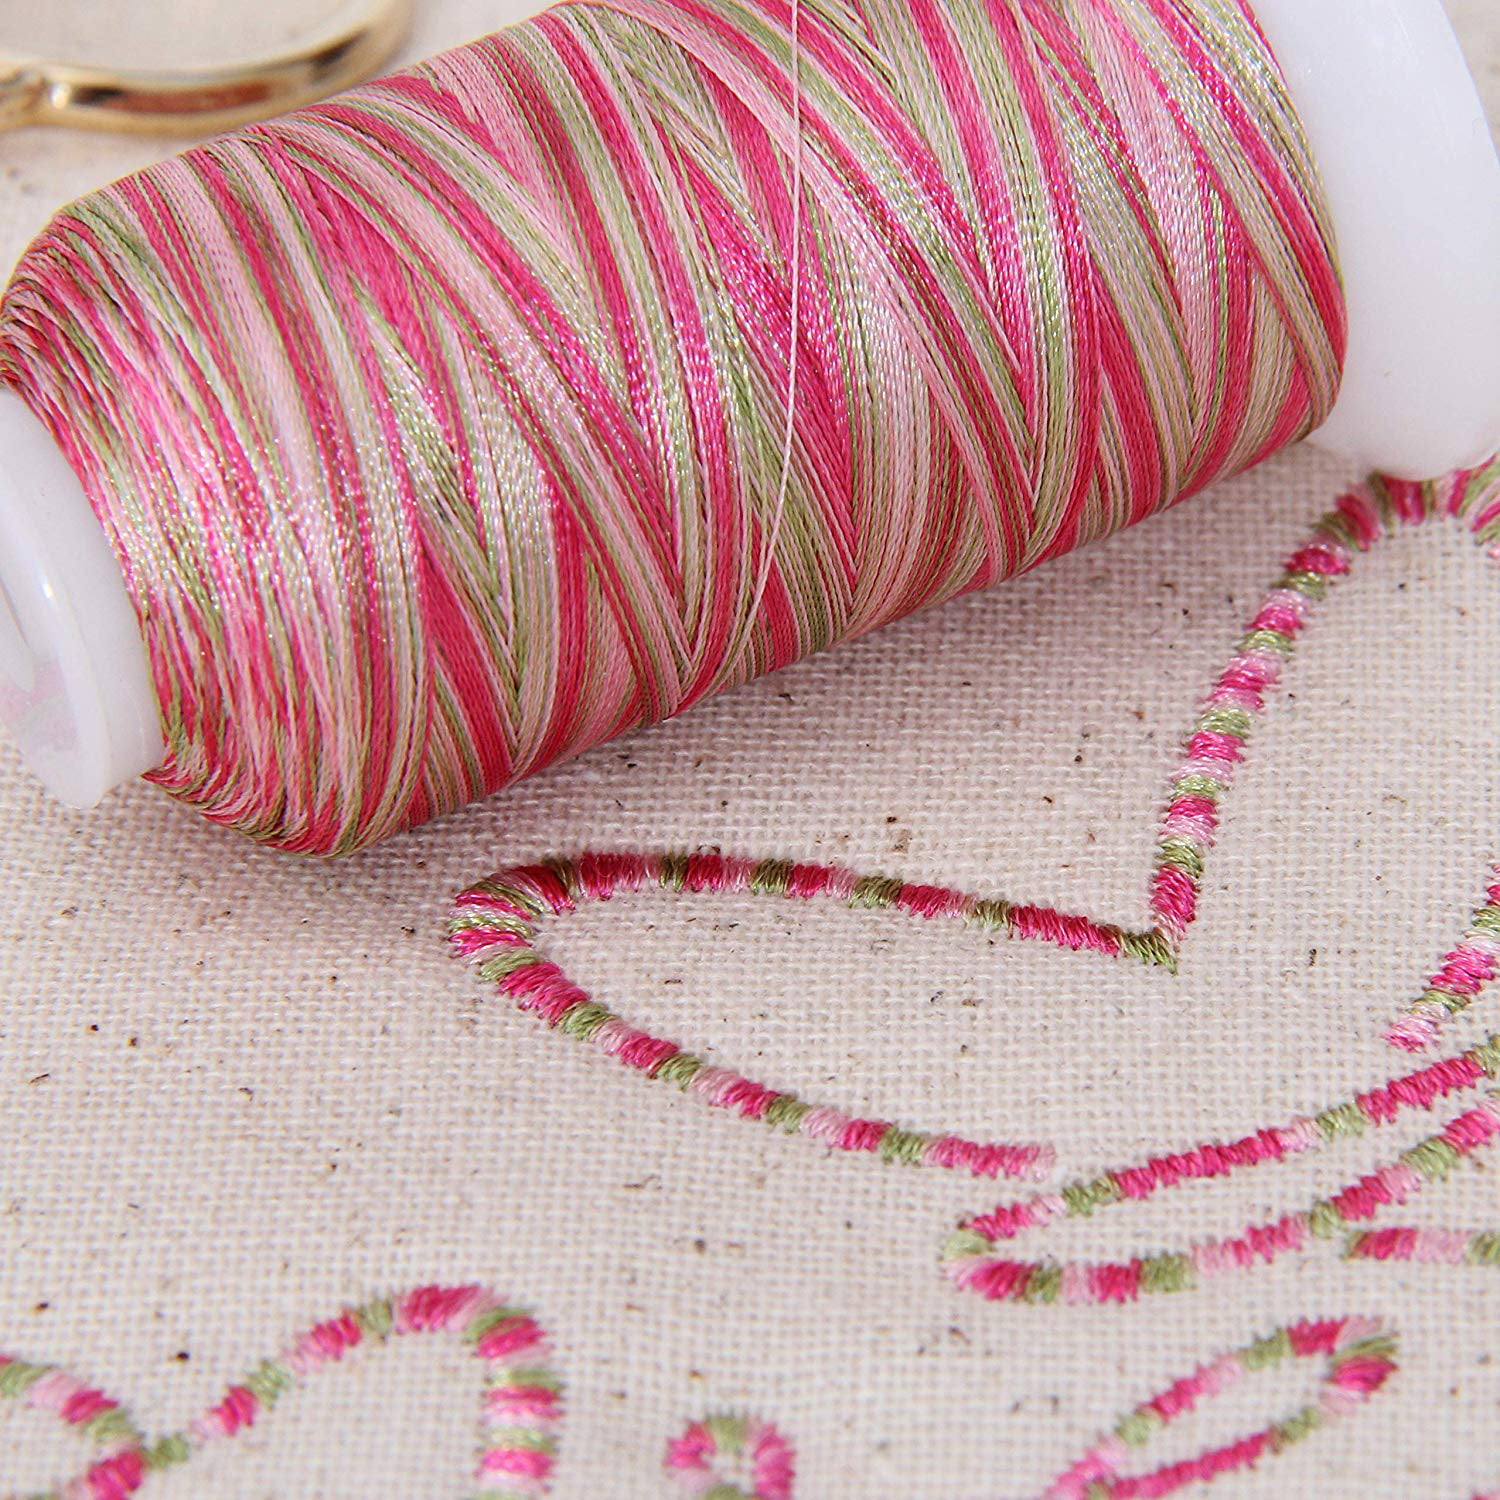 Exquisite Holiday Medley Variegated Embroidery Thread Set